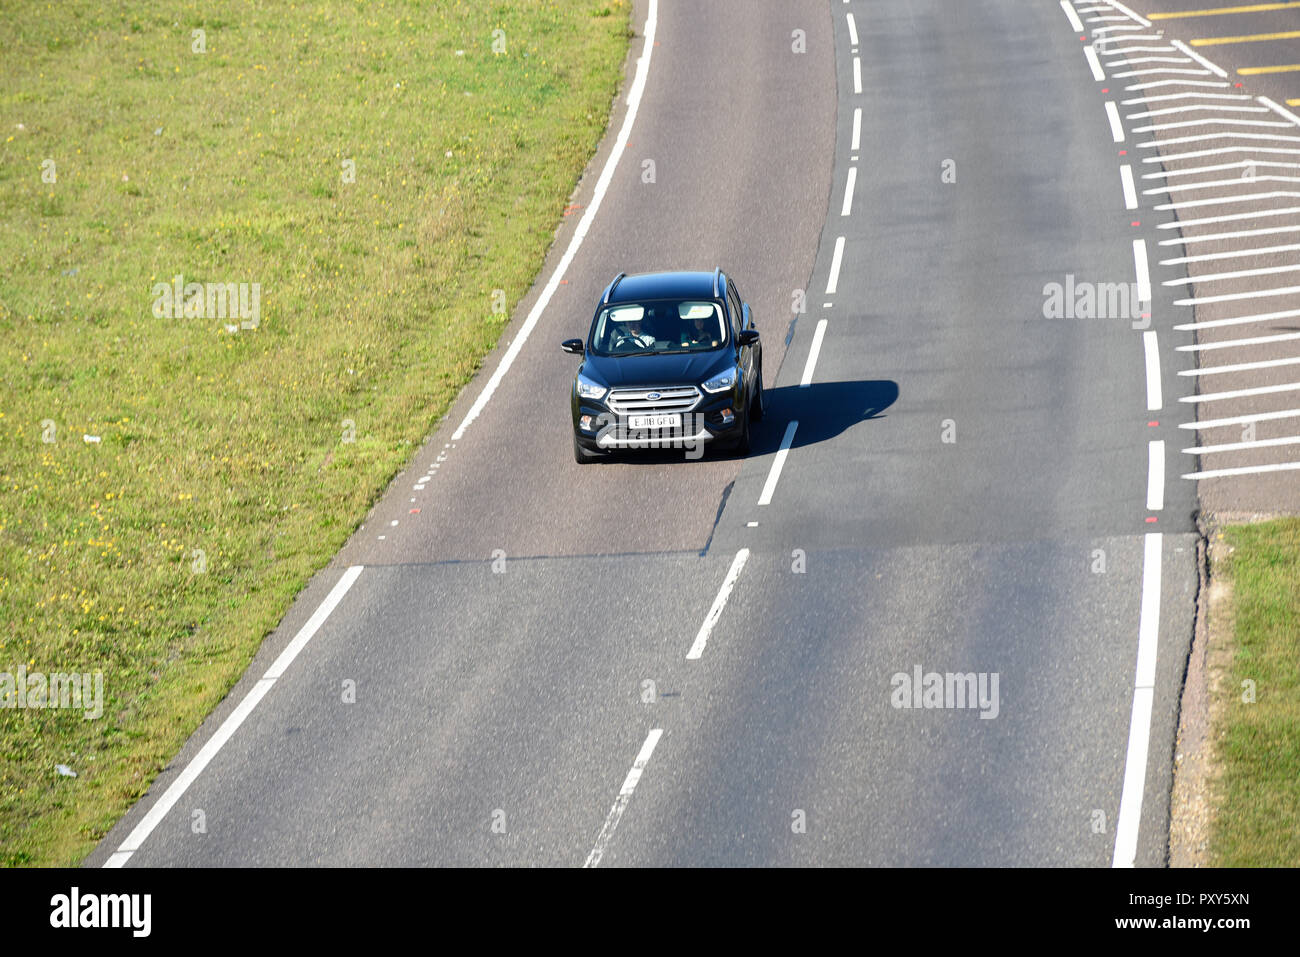 Lone car driving on a stretch of A130 duel carriageway after exit. Ford Kuga. Single vehicle automobile on road Patchwork road surfaces Copyspace Stock Photo